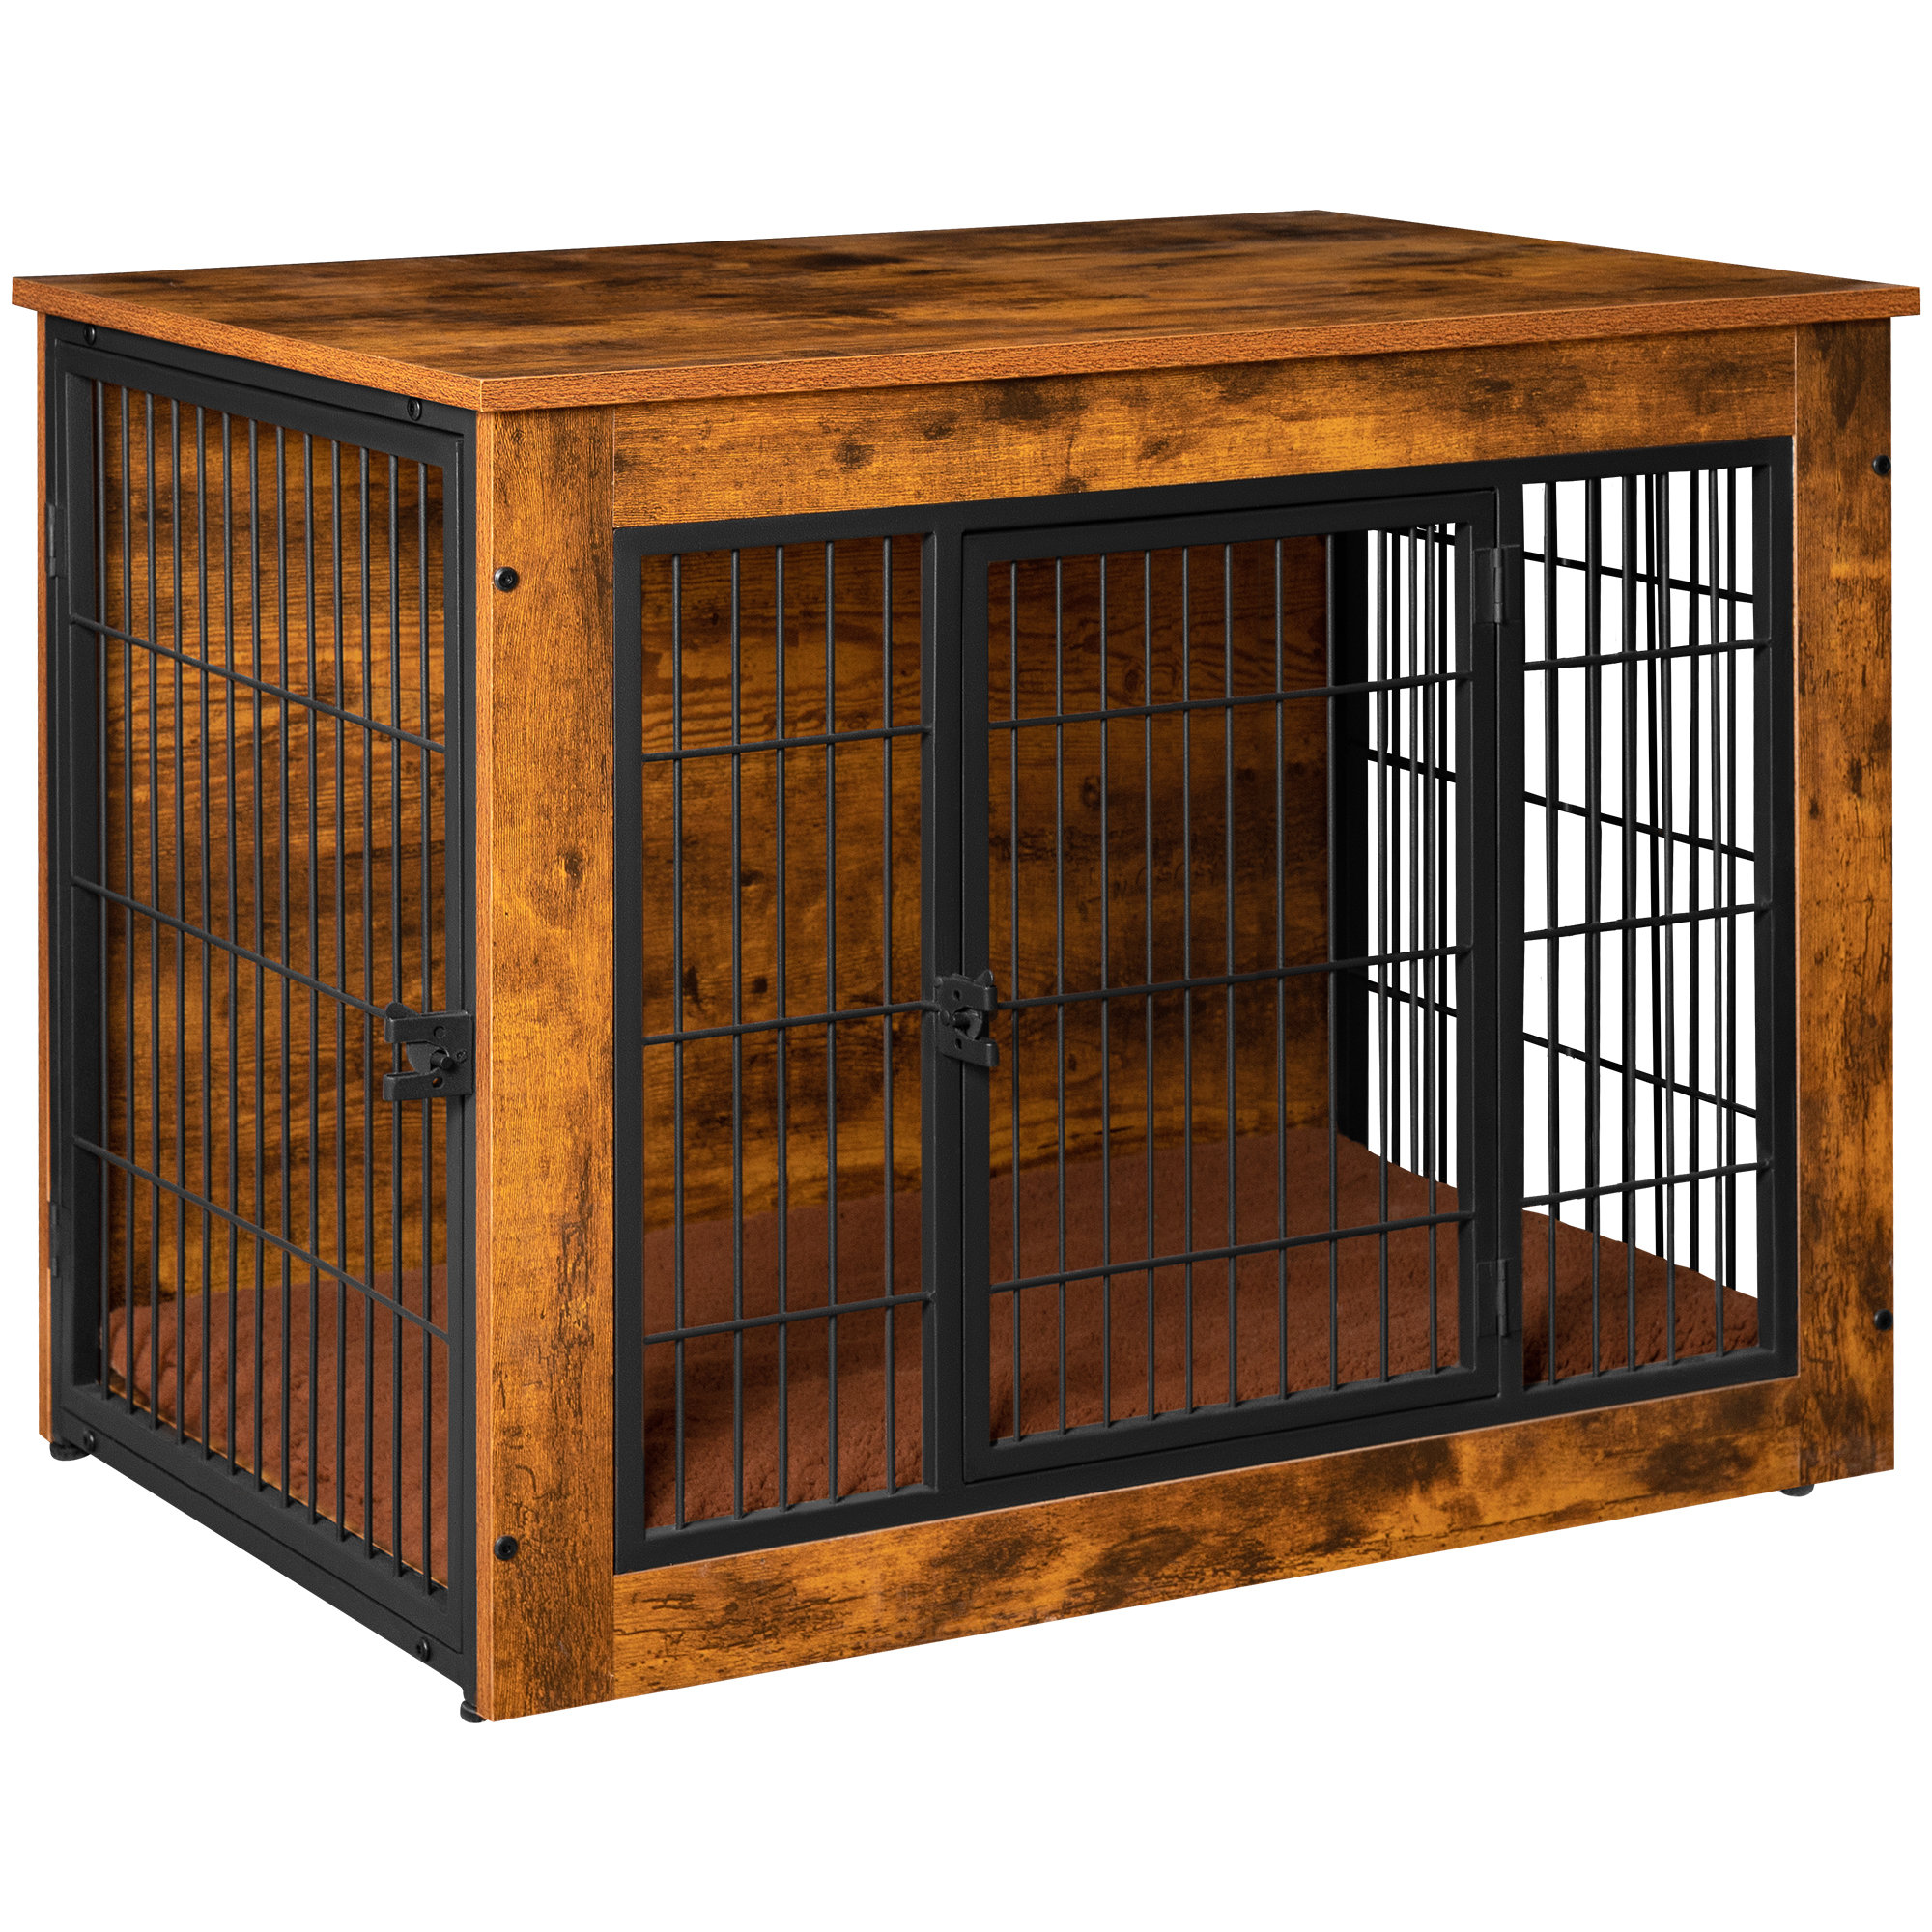 Large Dog Crate Furniture for 2 Dog, 61 Wood Dog Crate Cage Furniture with Removable Divider, Sliding Door TV Stand Indoor Dog Kennel for Small